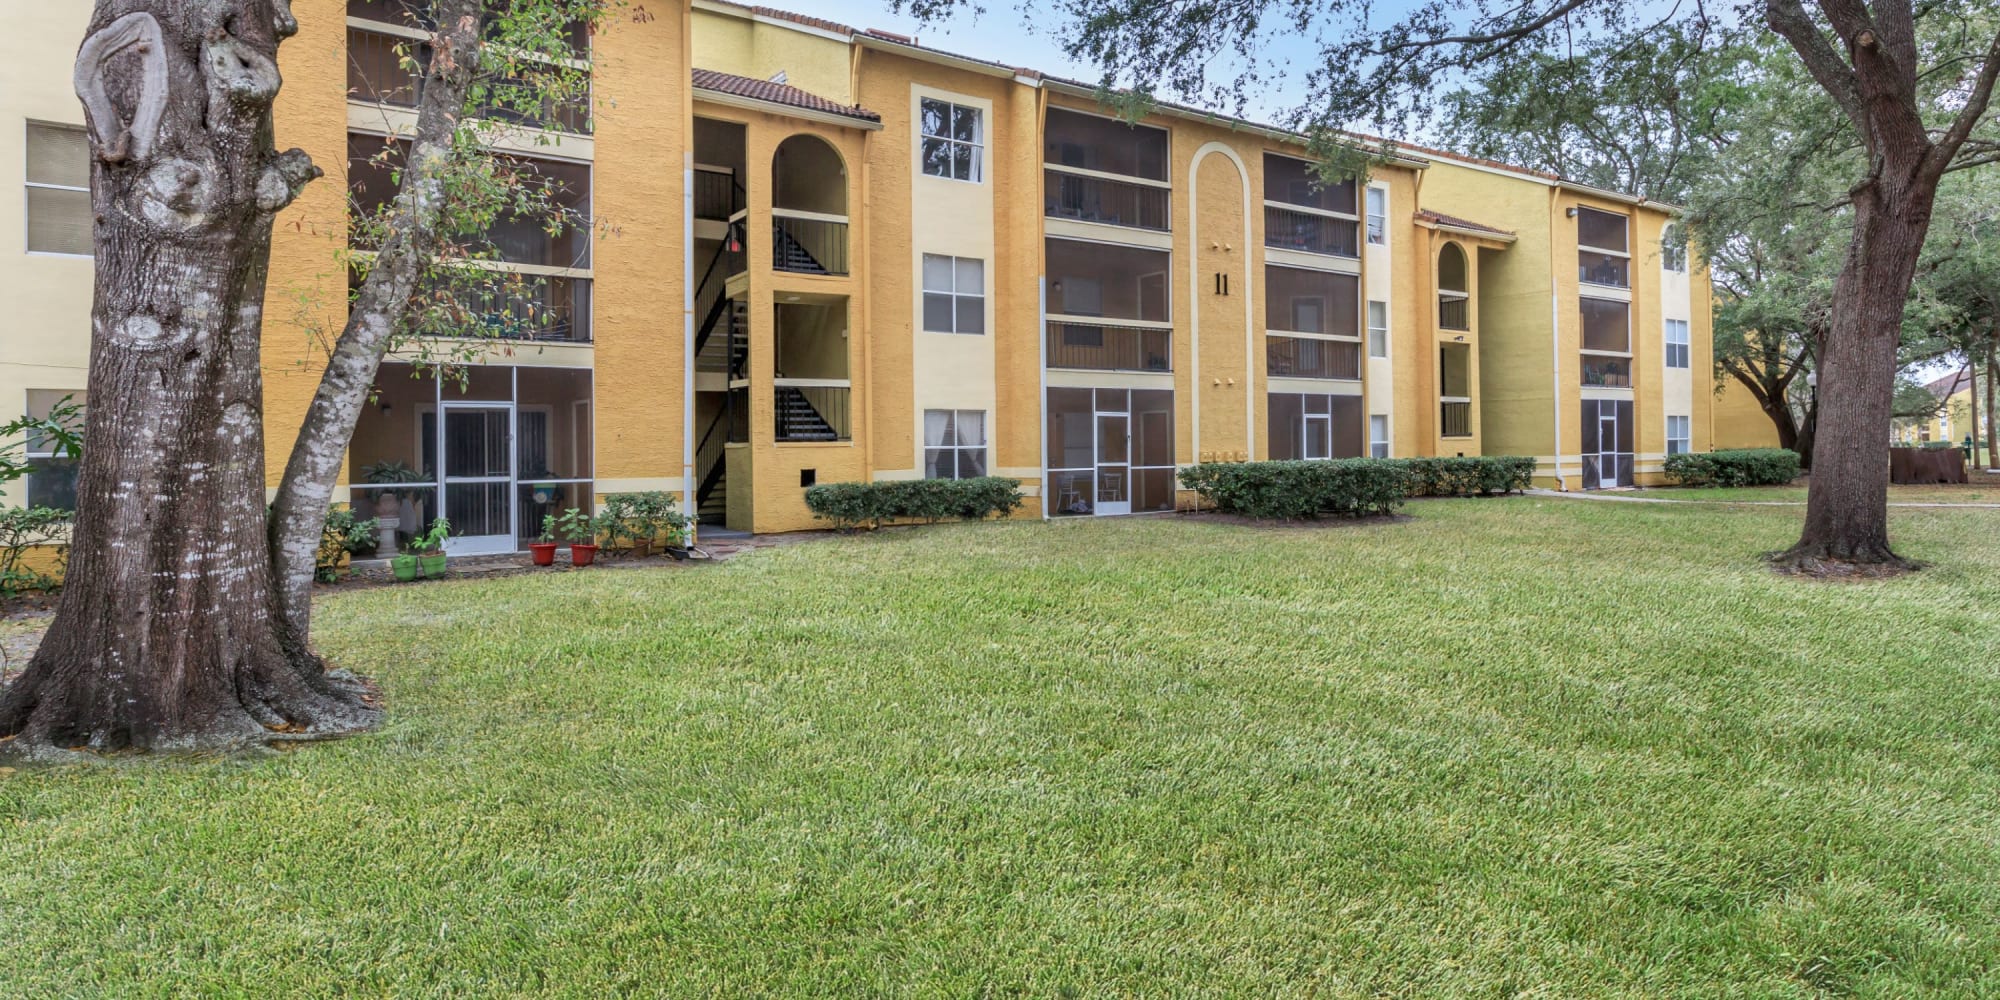 Green lawn outside of Images Condominiums in Kissimmee, Florida